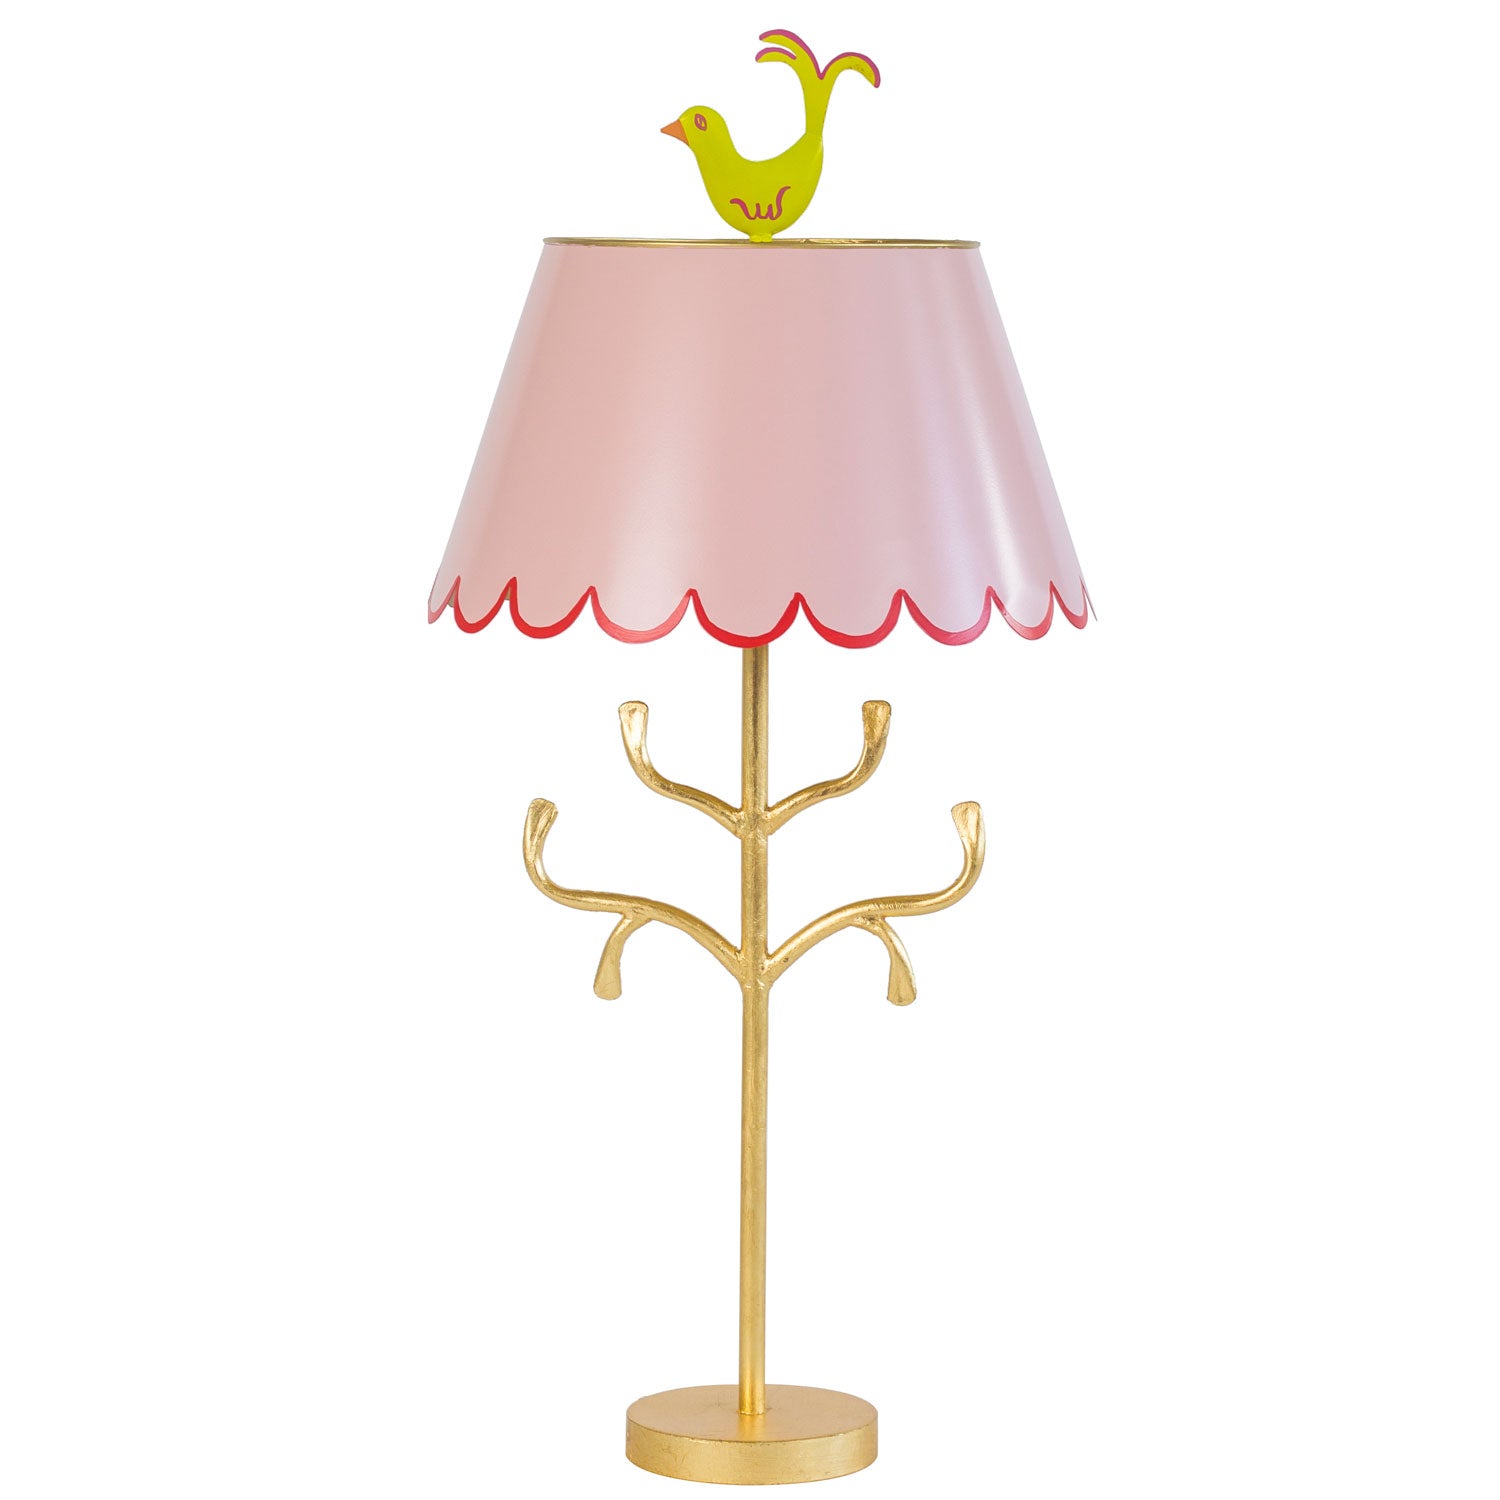 Light pink Mrs English lamp, red trim on scallops, chartreuse birdie finial